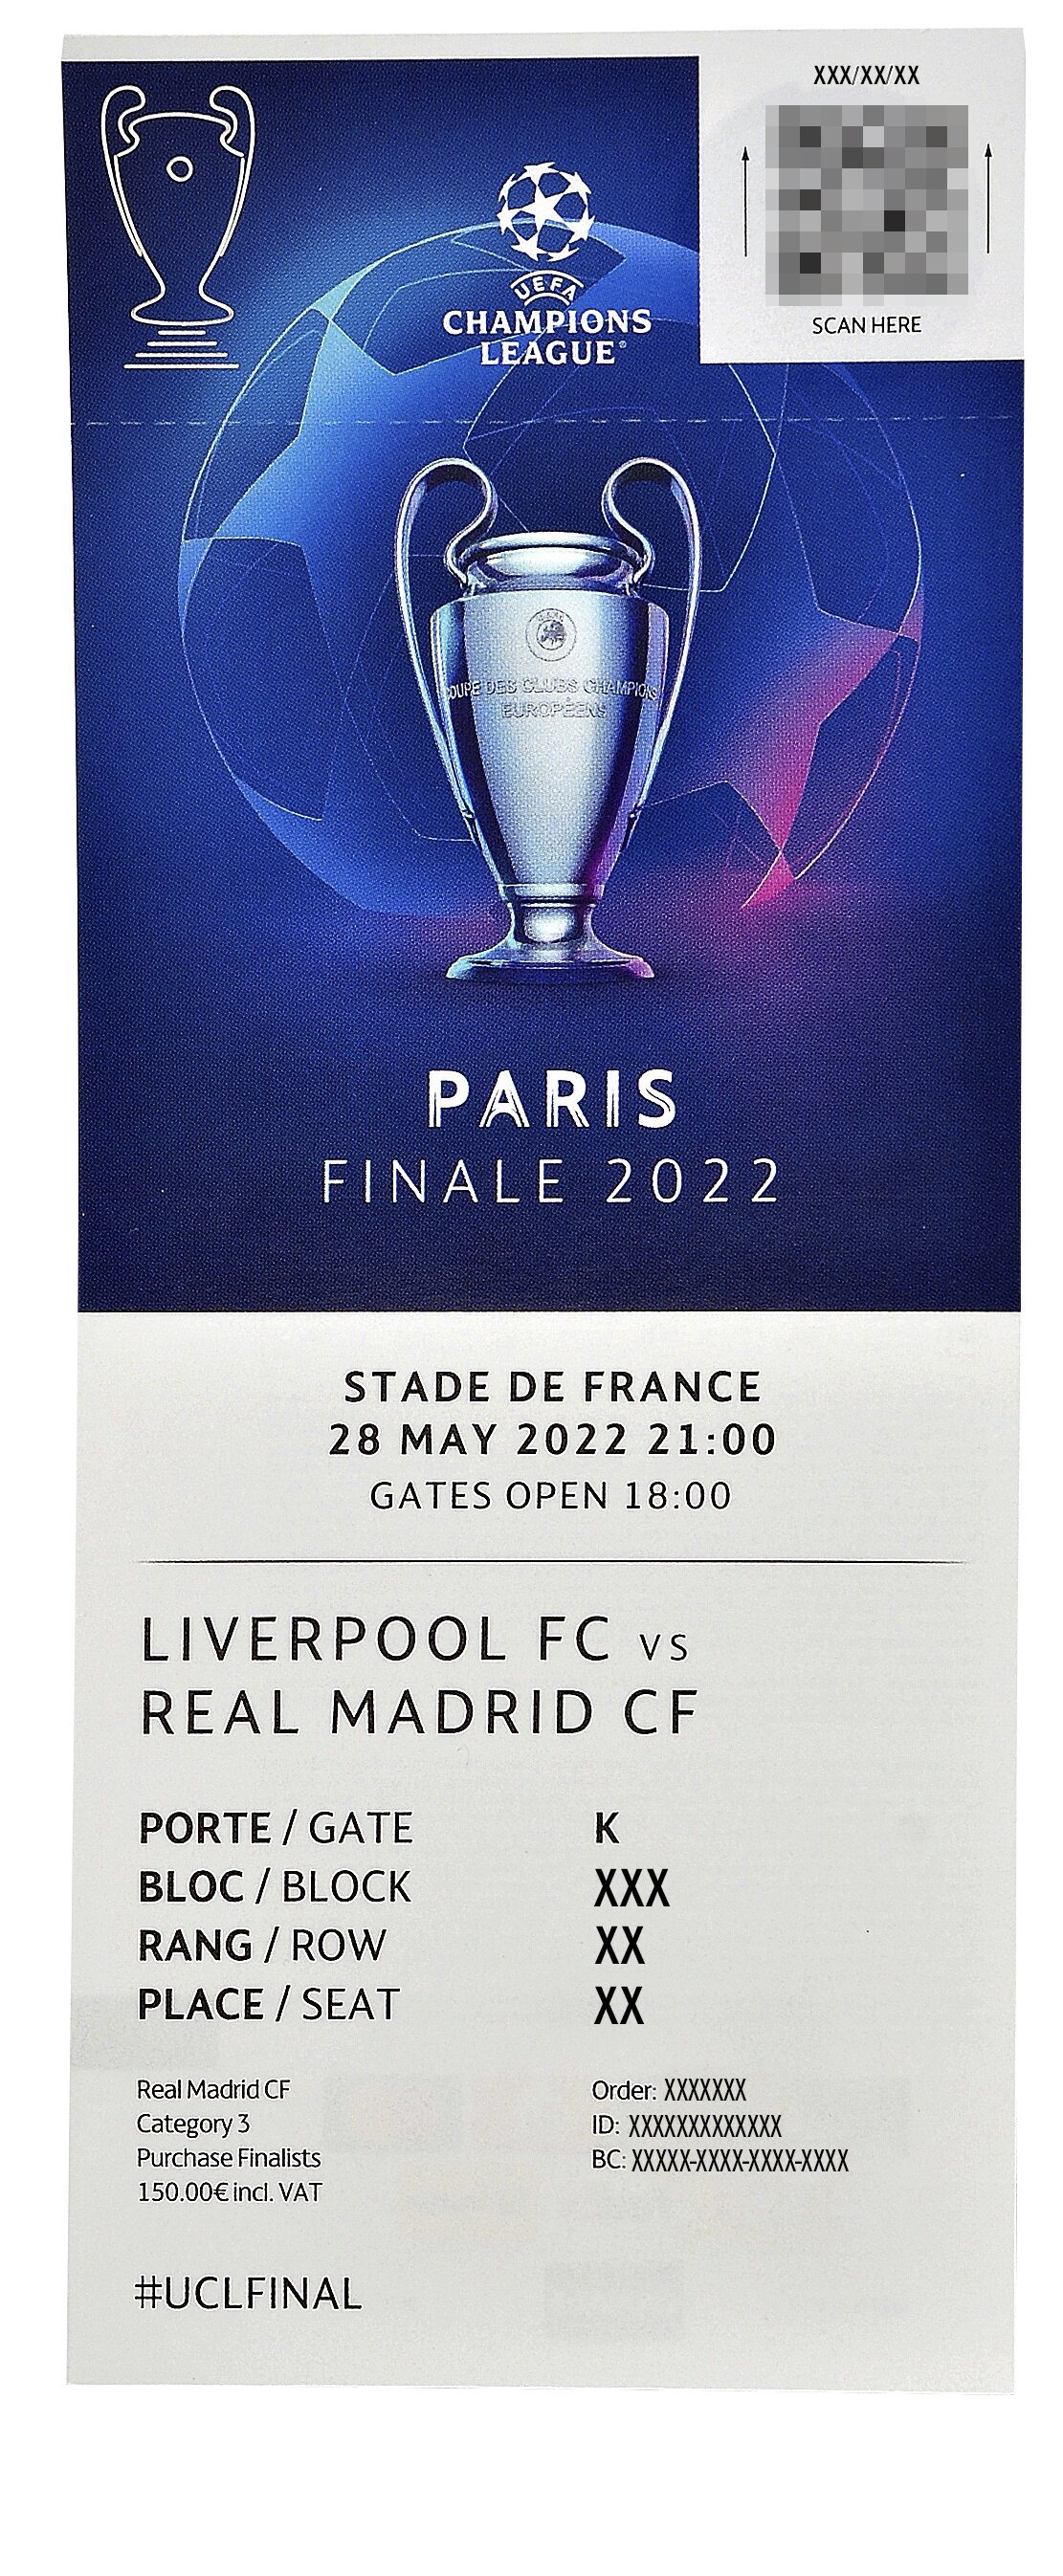 Tickets for the Champions League Final